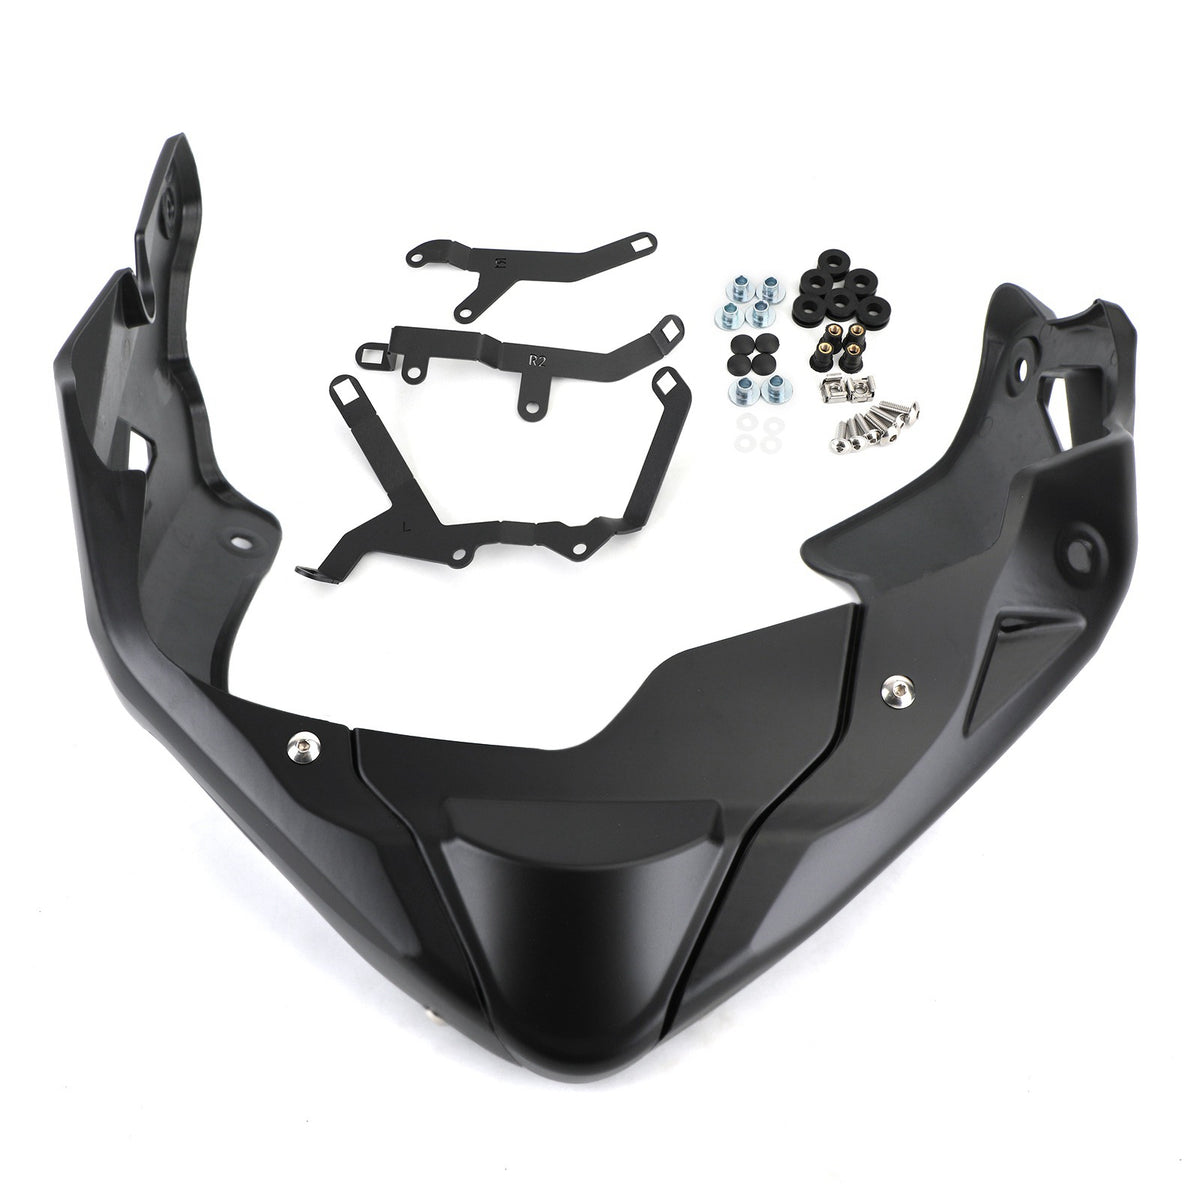 BELLY PAN UNDER ENGINE COVER FAIRINGS EXHUAST GUARD Fit for Honda CB650R 2019-2021